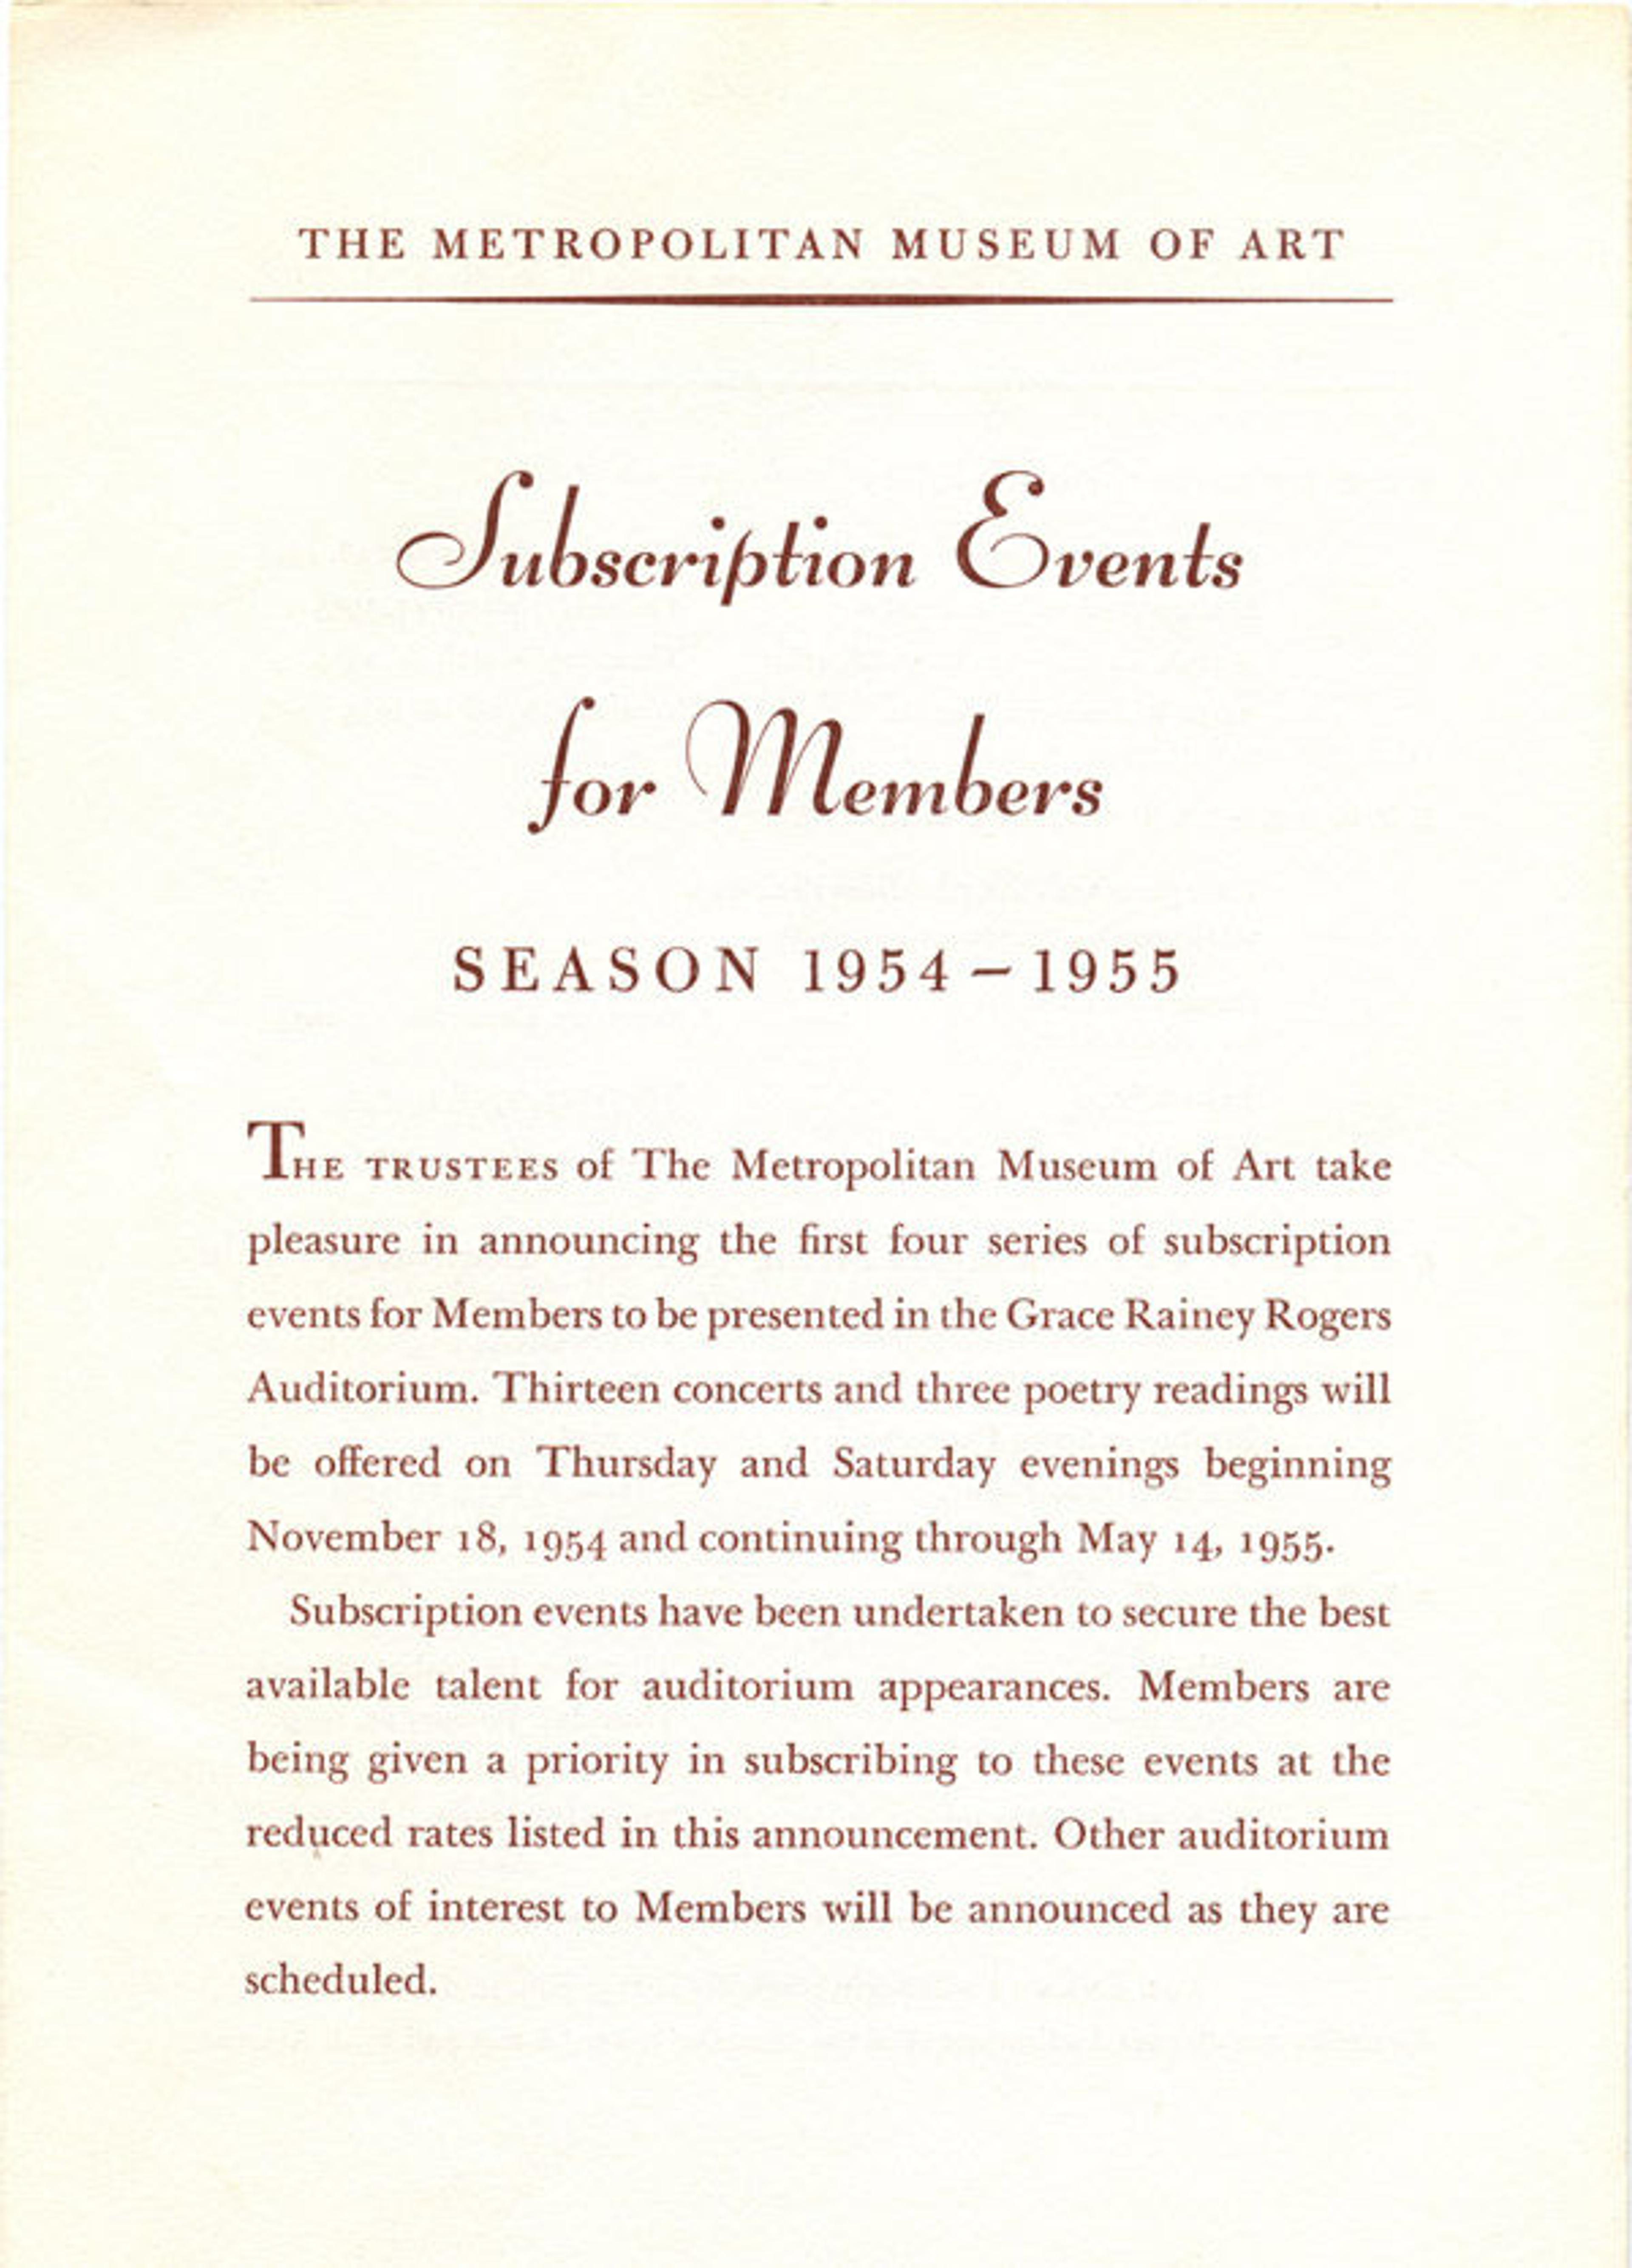 Brochure cover for the 1954–55 "Subscription Events for Members"